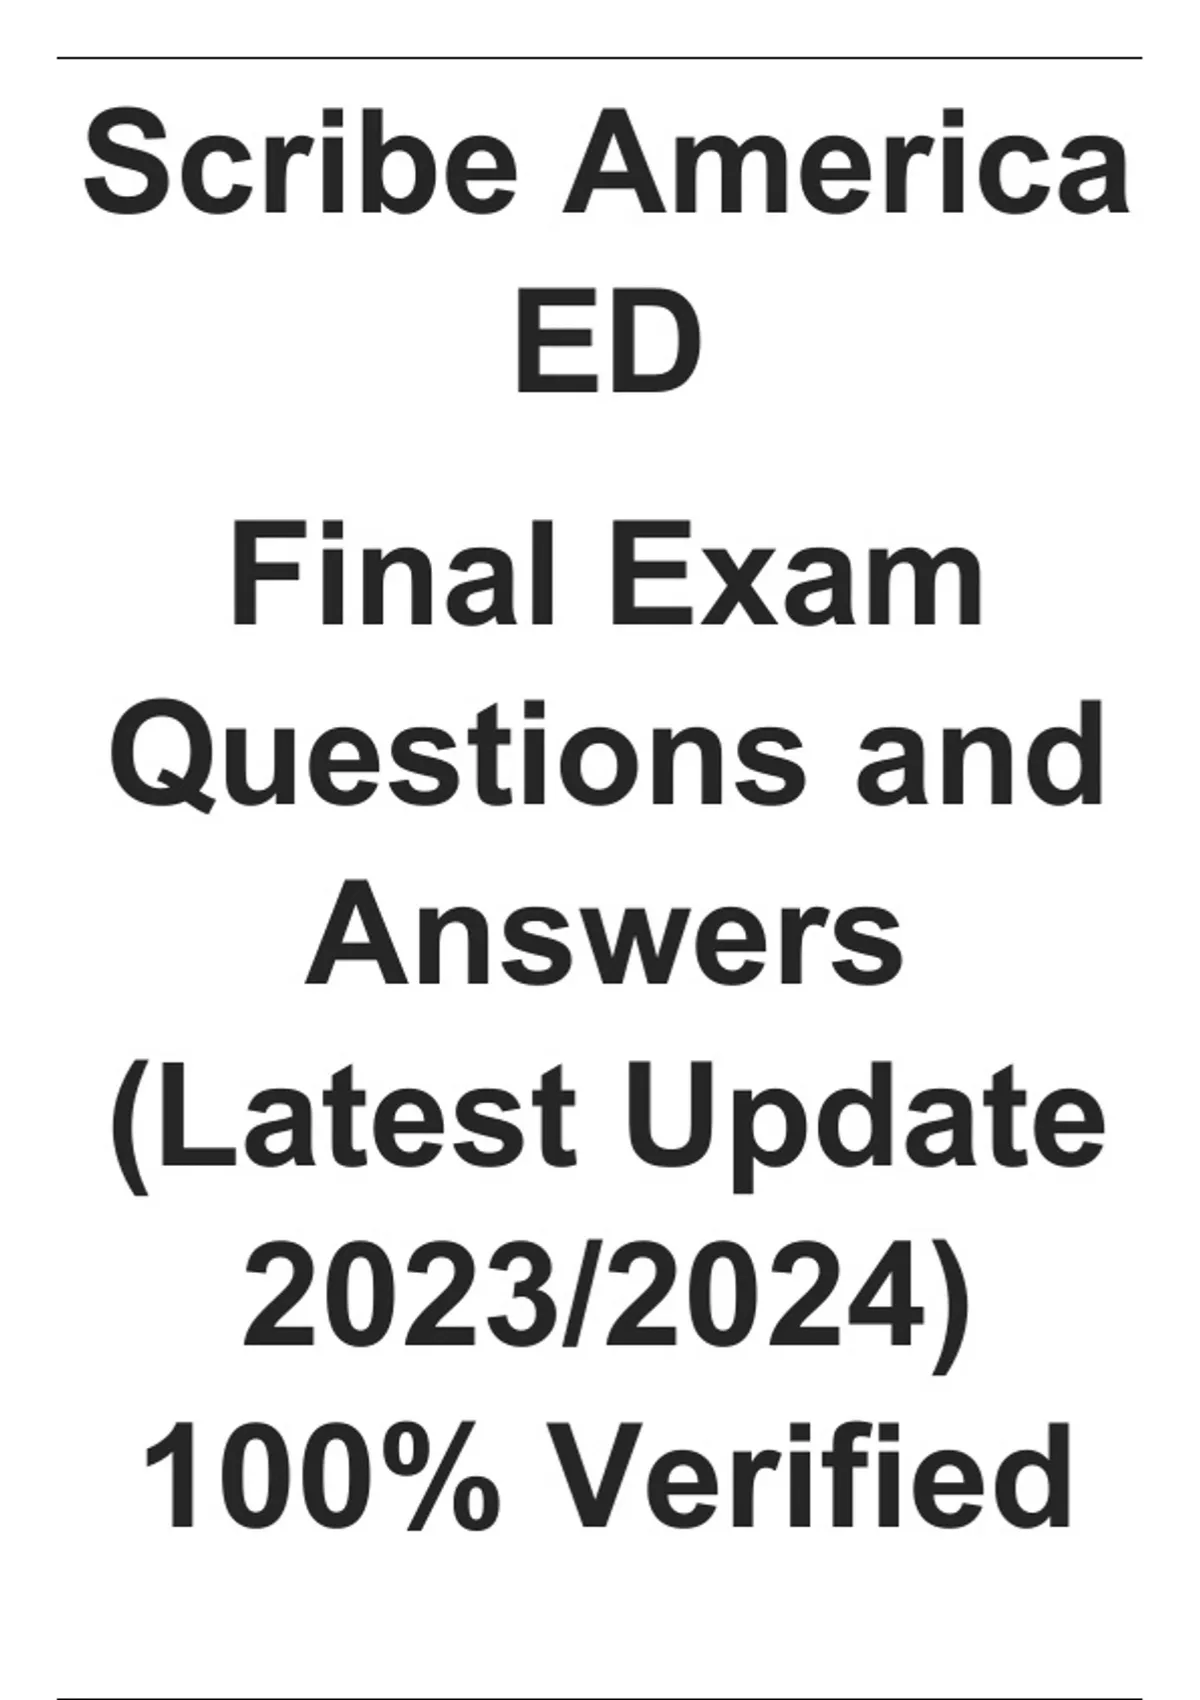 Scribe America ED Final Exam Questions and Answers (Latest Update 20232024) 100 Verified